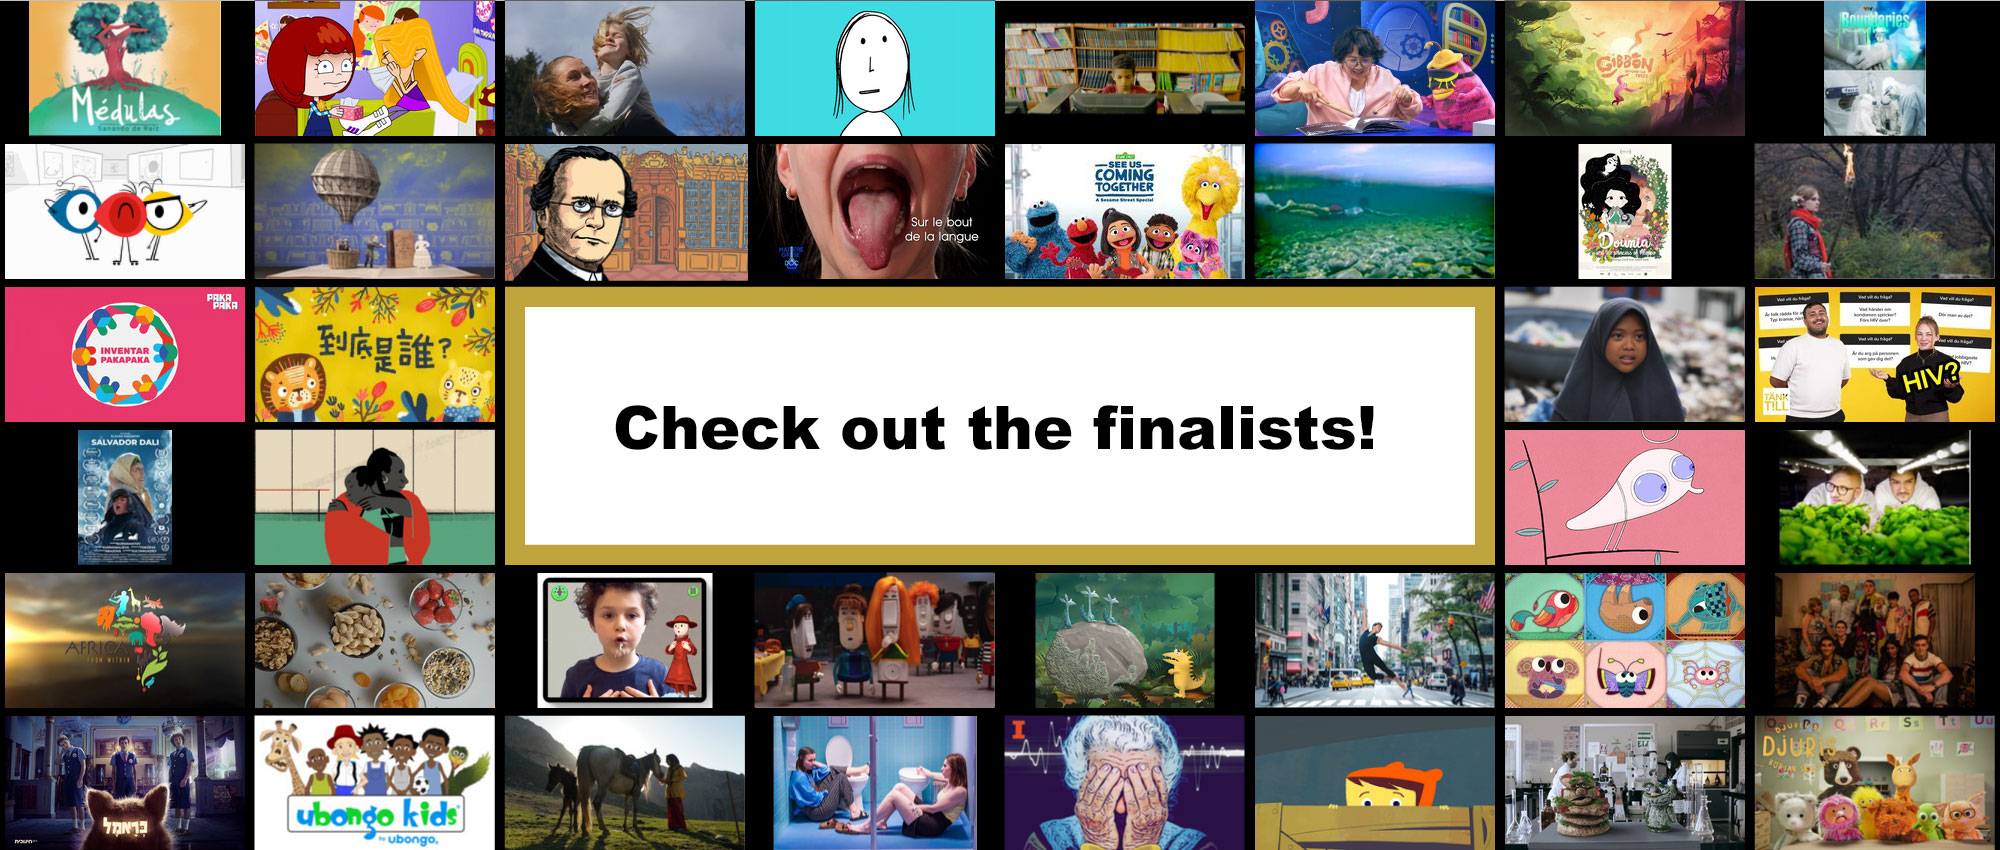 Check out the finalists!